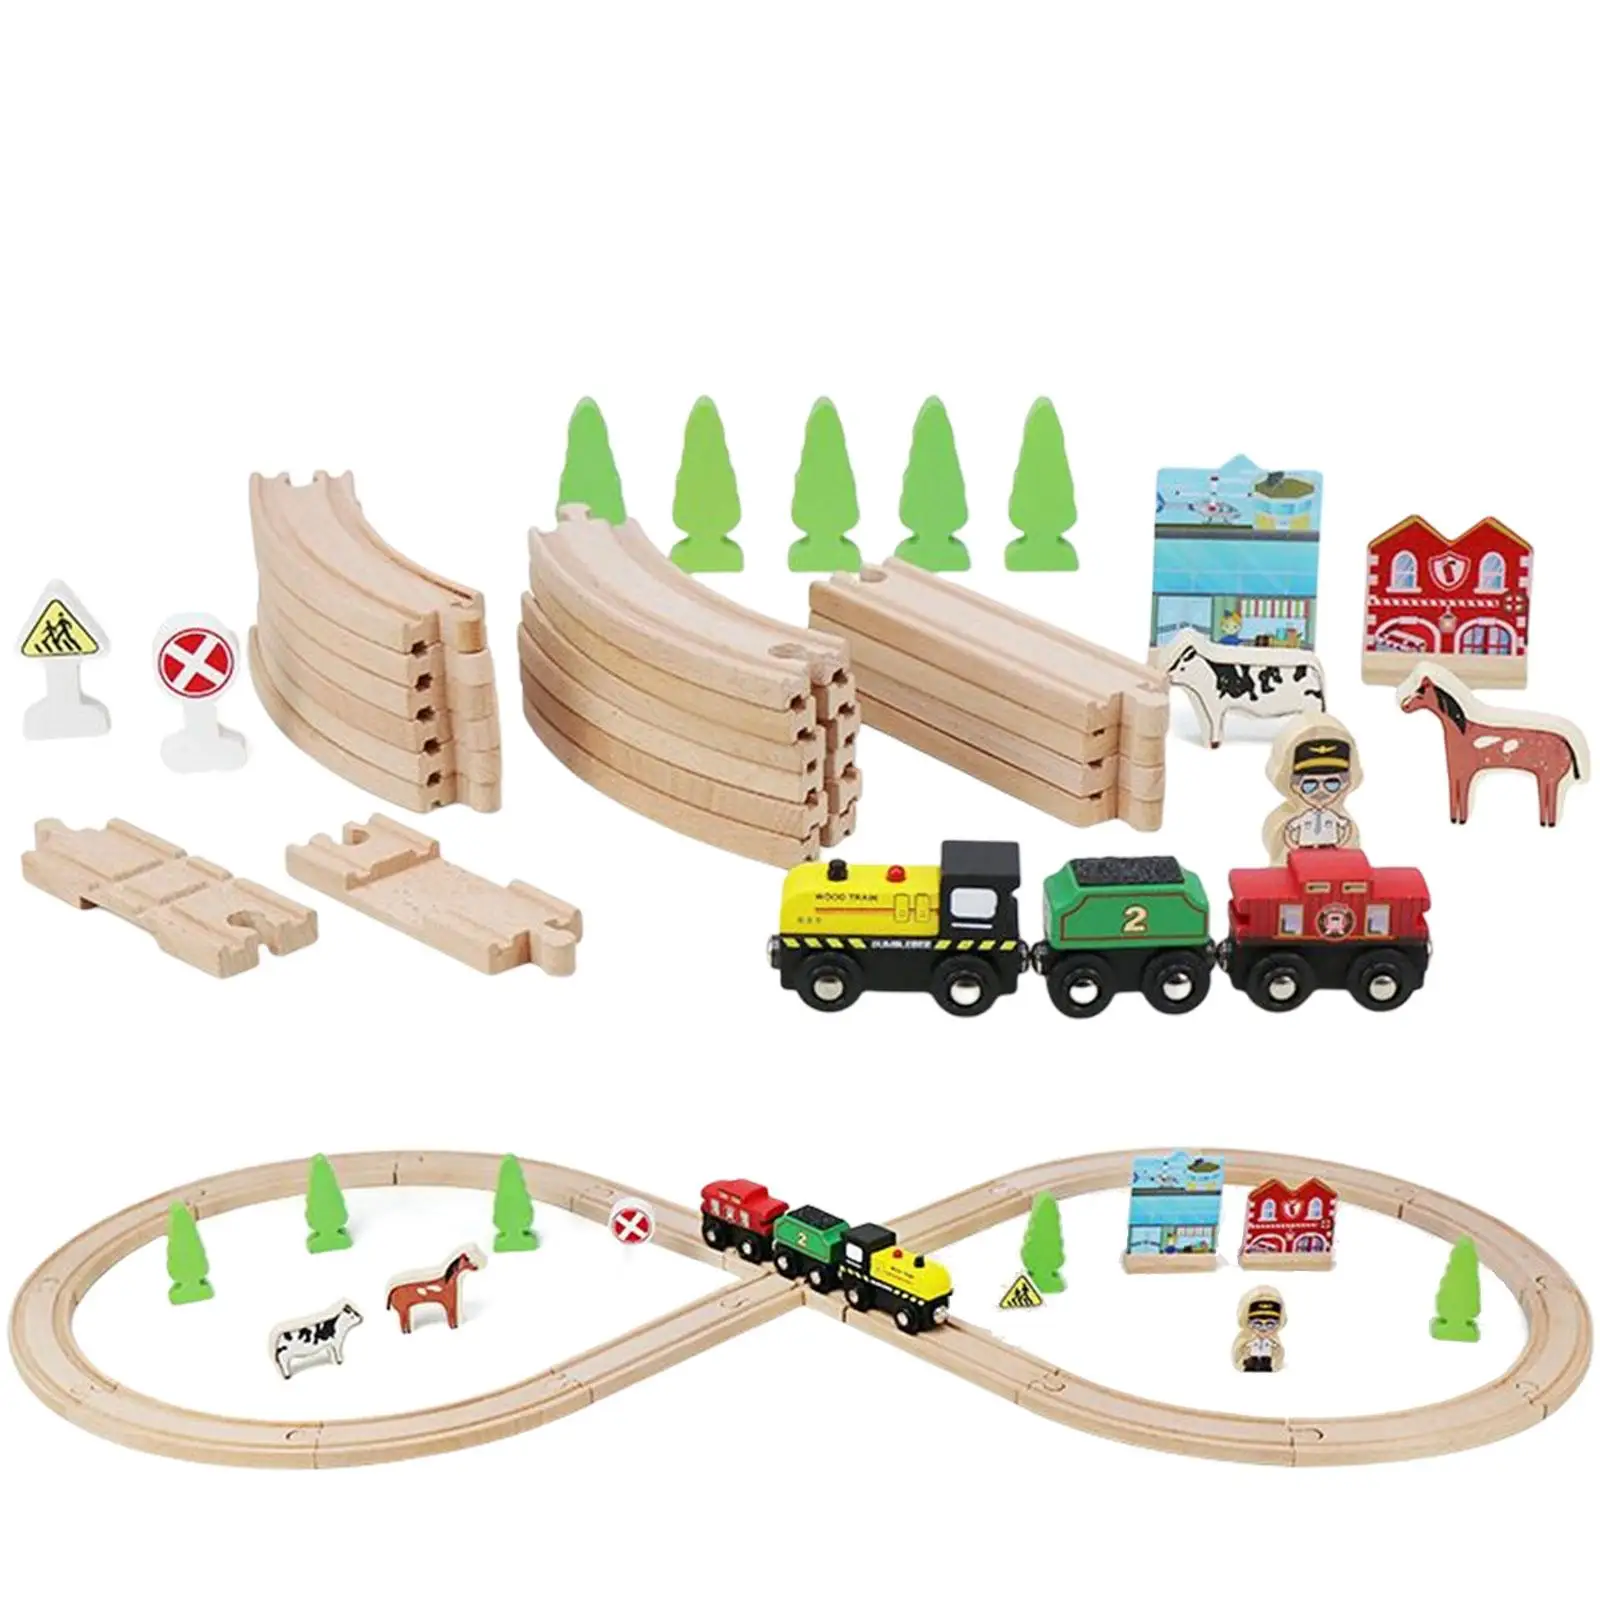 Train Set Building Kit Train Tracks Toy Party Favors for Toddlers Children